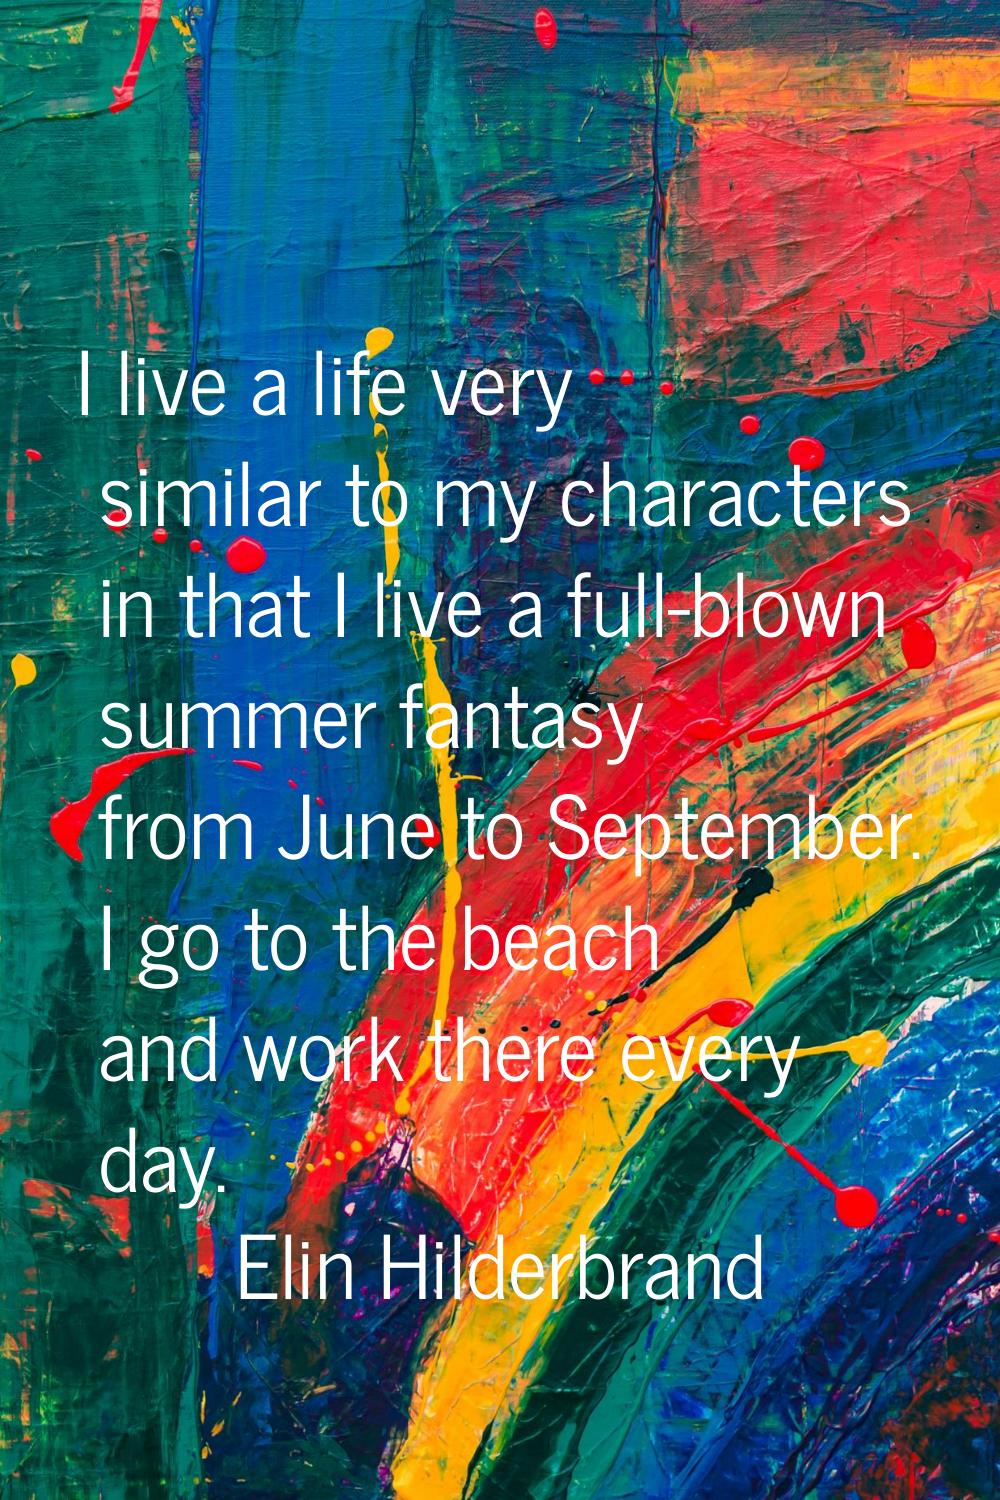 I live a life very similar to my characters in that I live a full-blown summer fantasy from June to